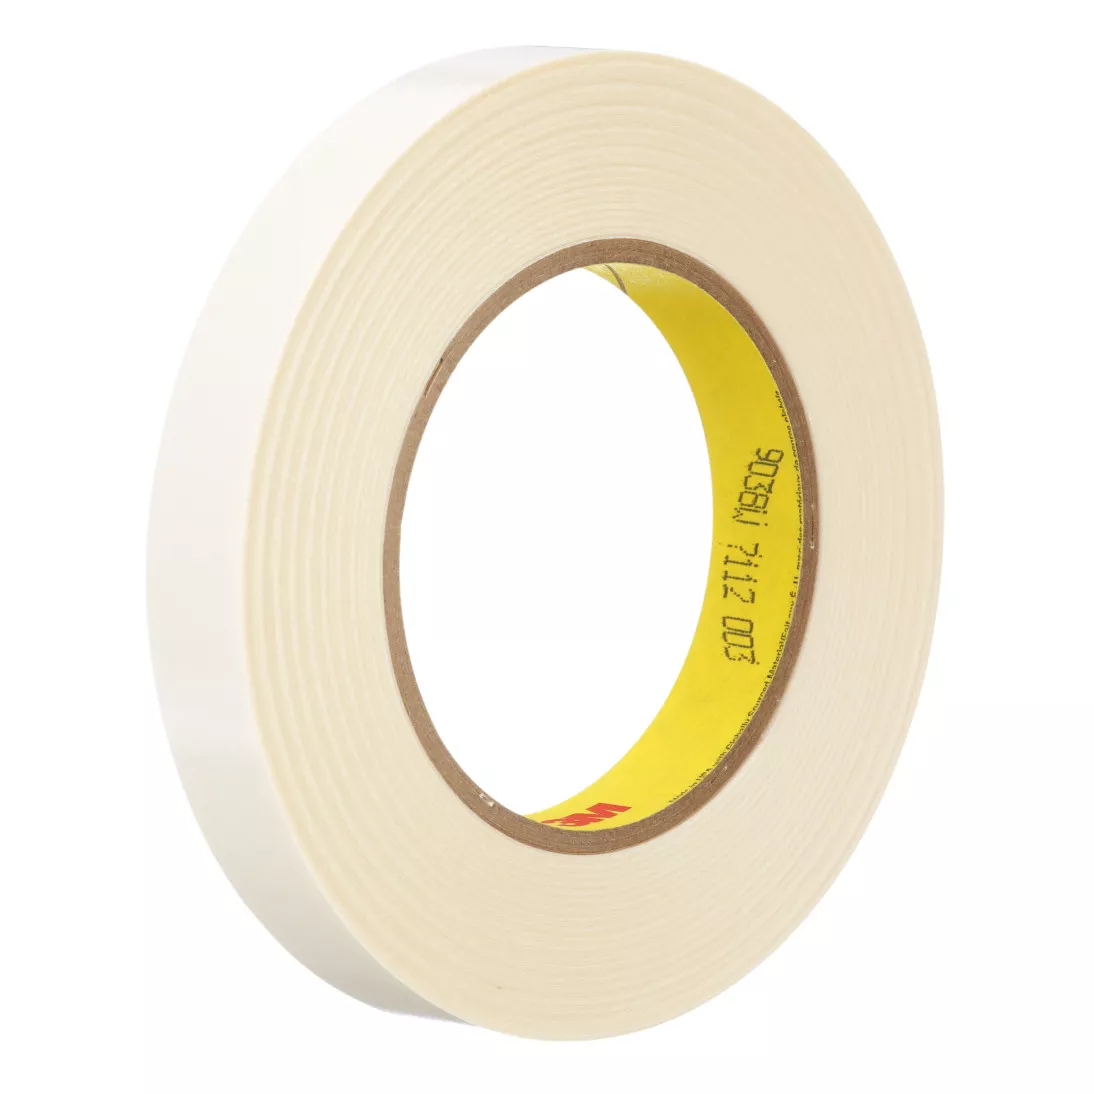 3M™ Repulpable Double Coated Splicing Tape 9038W, White, 18 mm x 55 m, 3
mil, 48 rolls per case